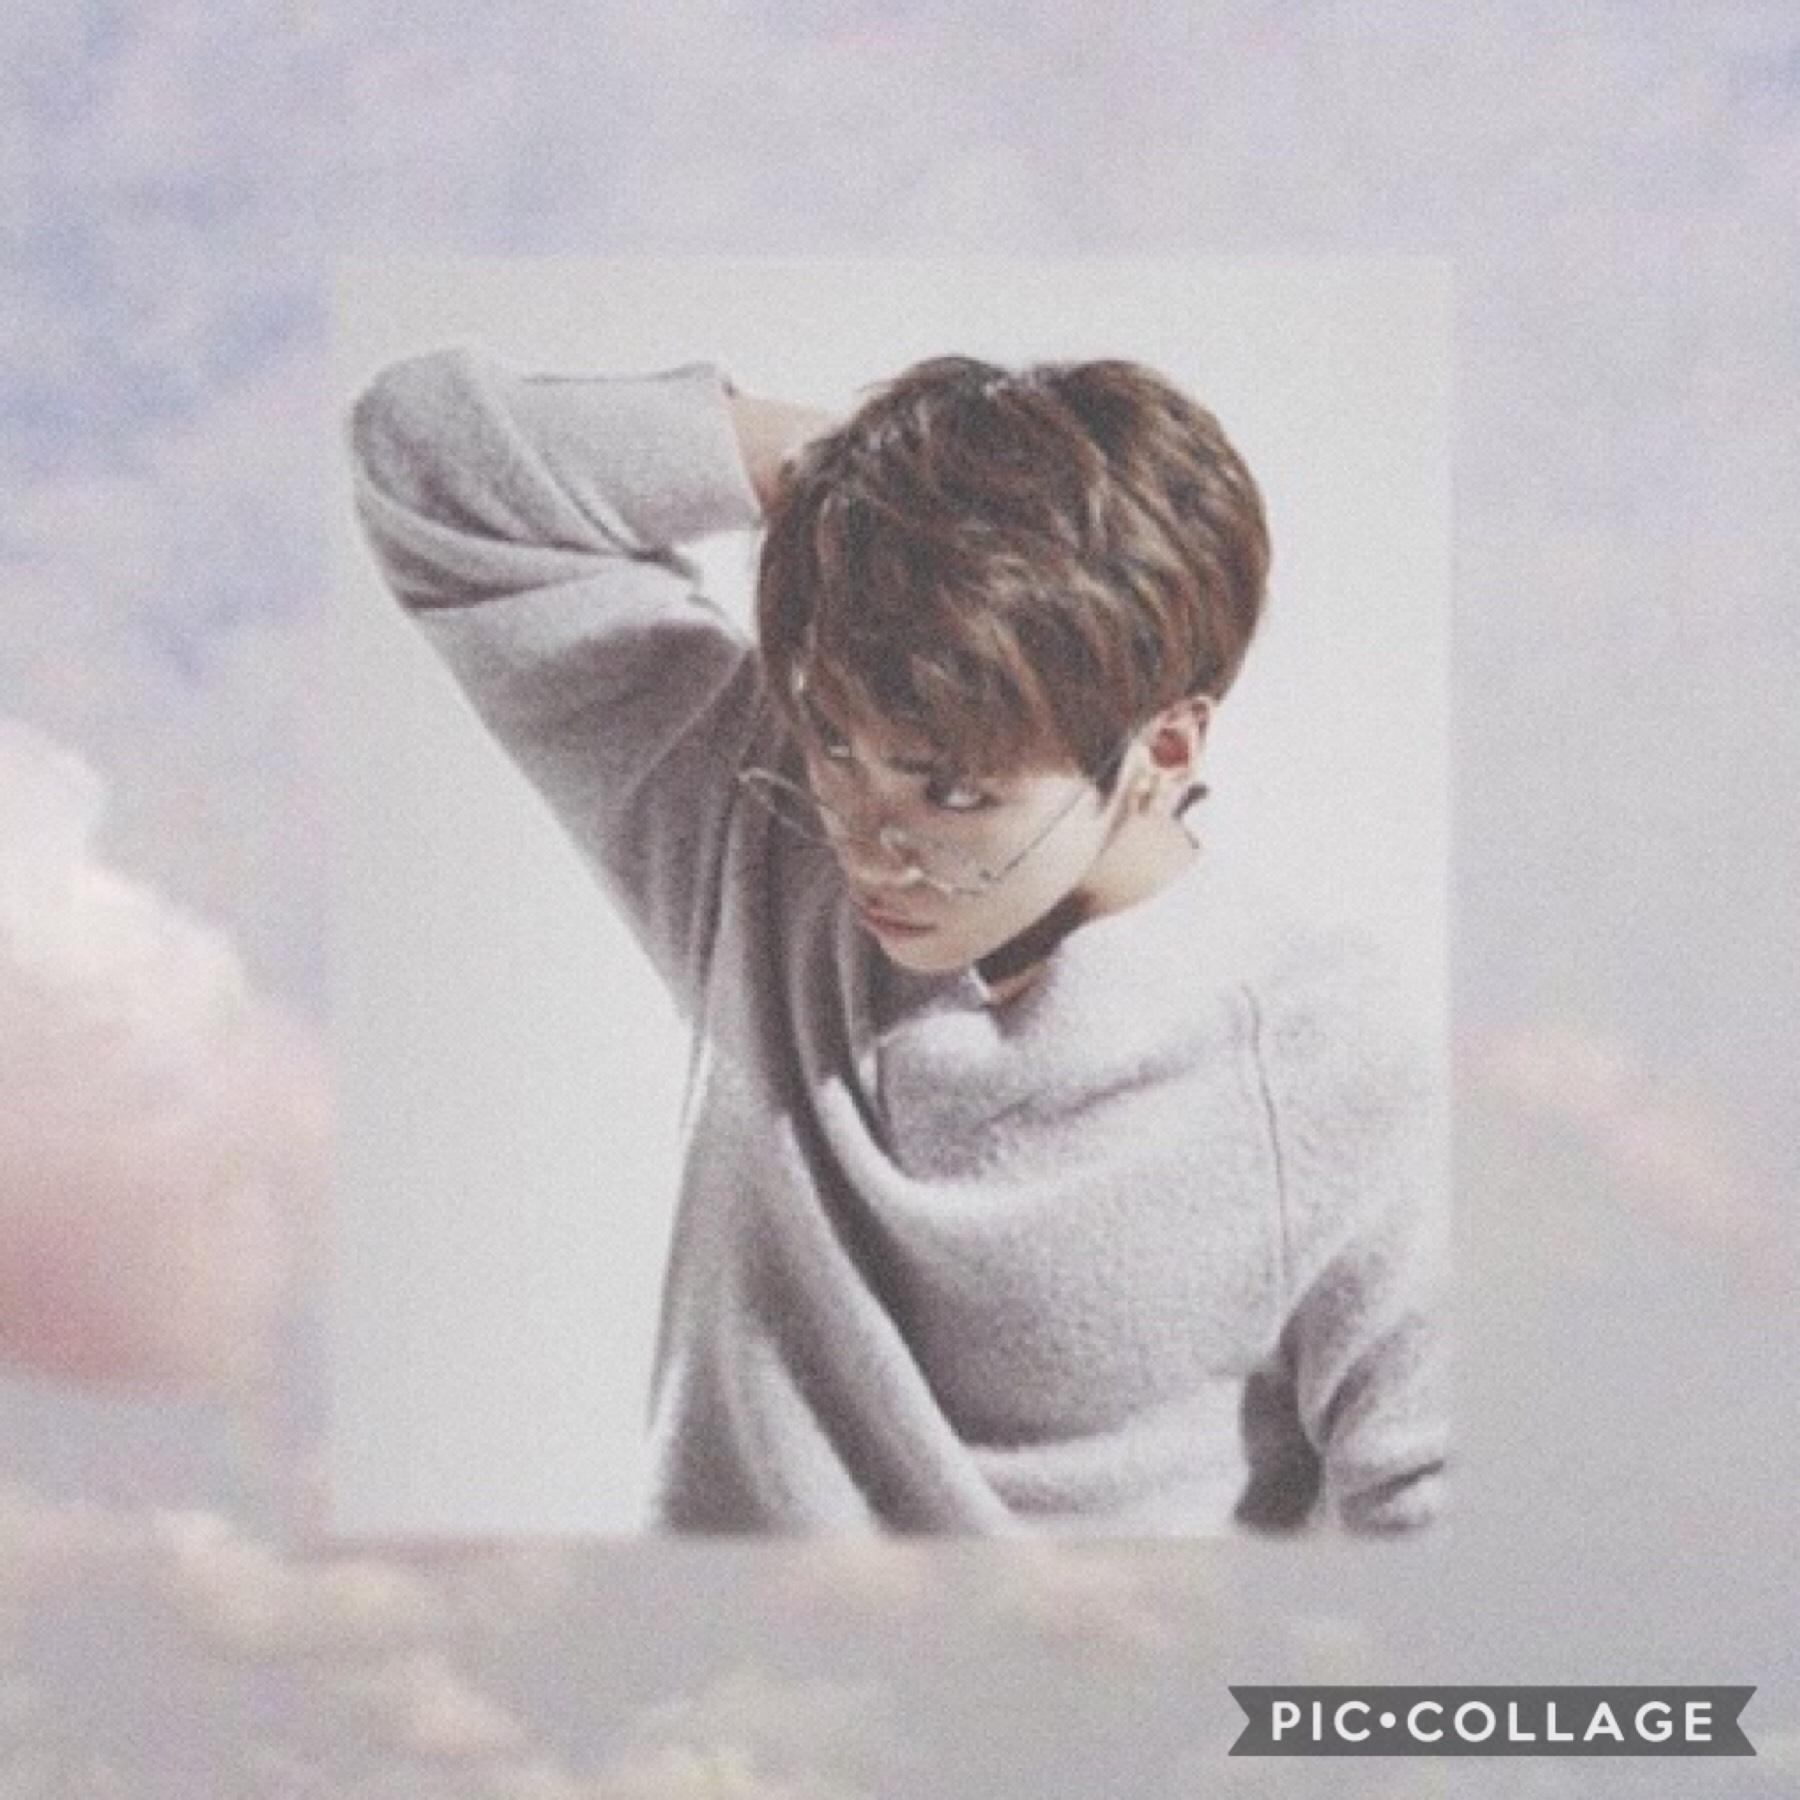 ; you did well ♡
i can’t believe it’s already been a year since we lost him...
rest in peace angel, we miss you
✧shine forever bright✧